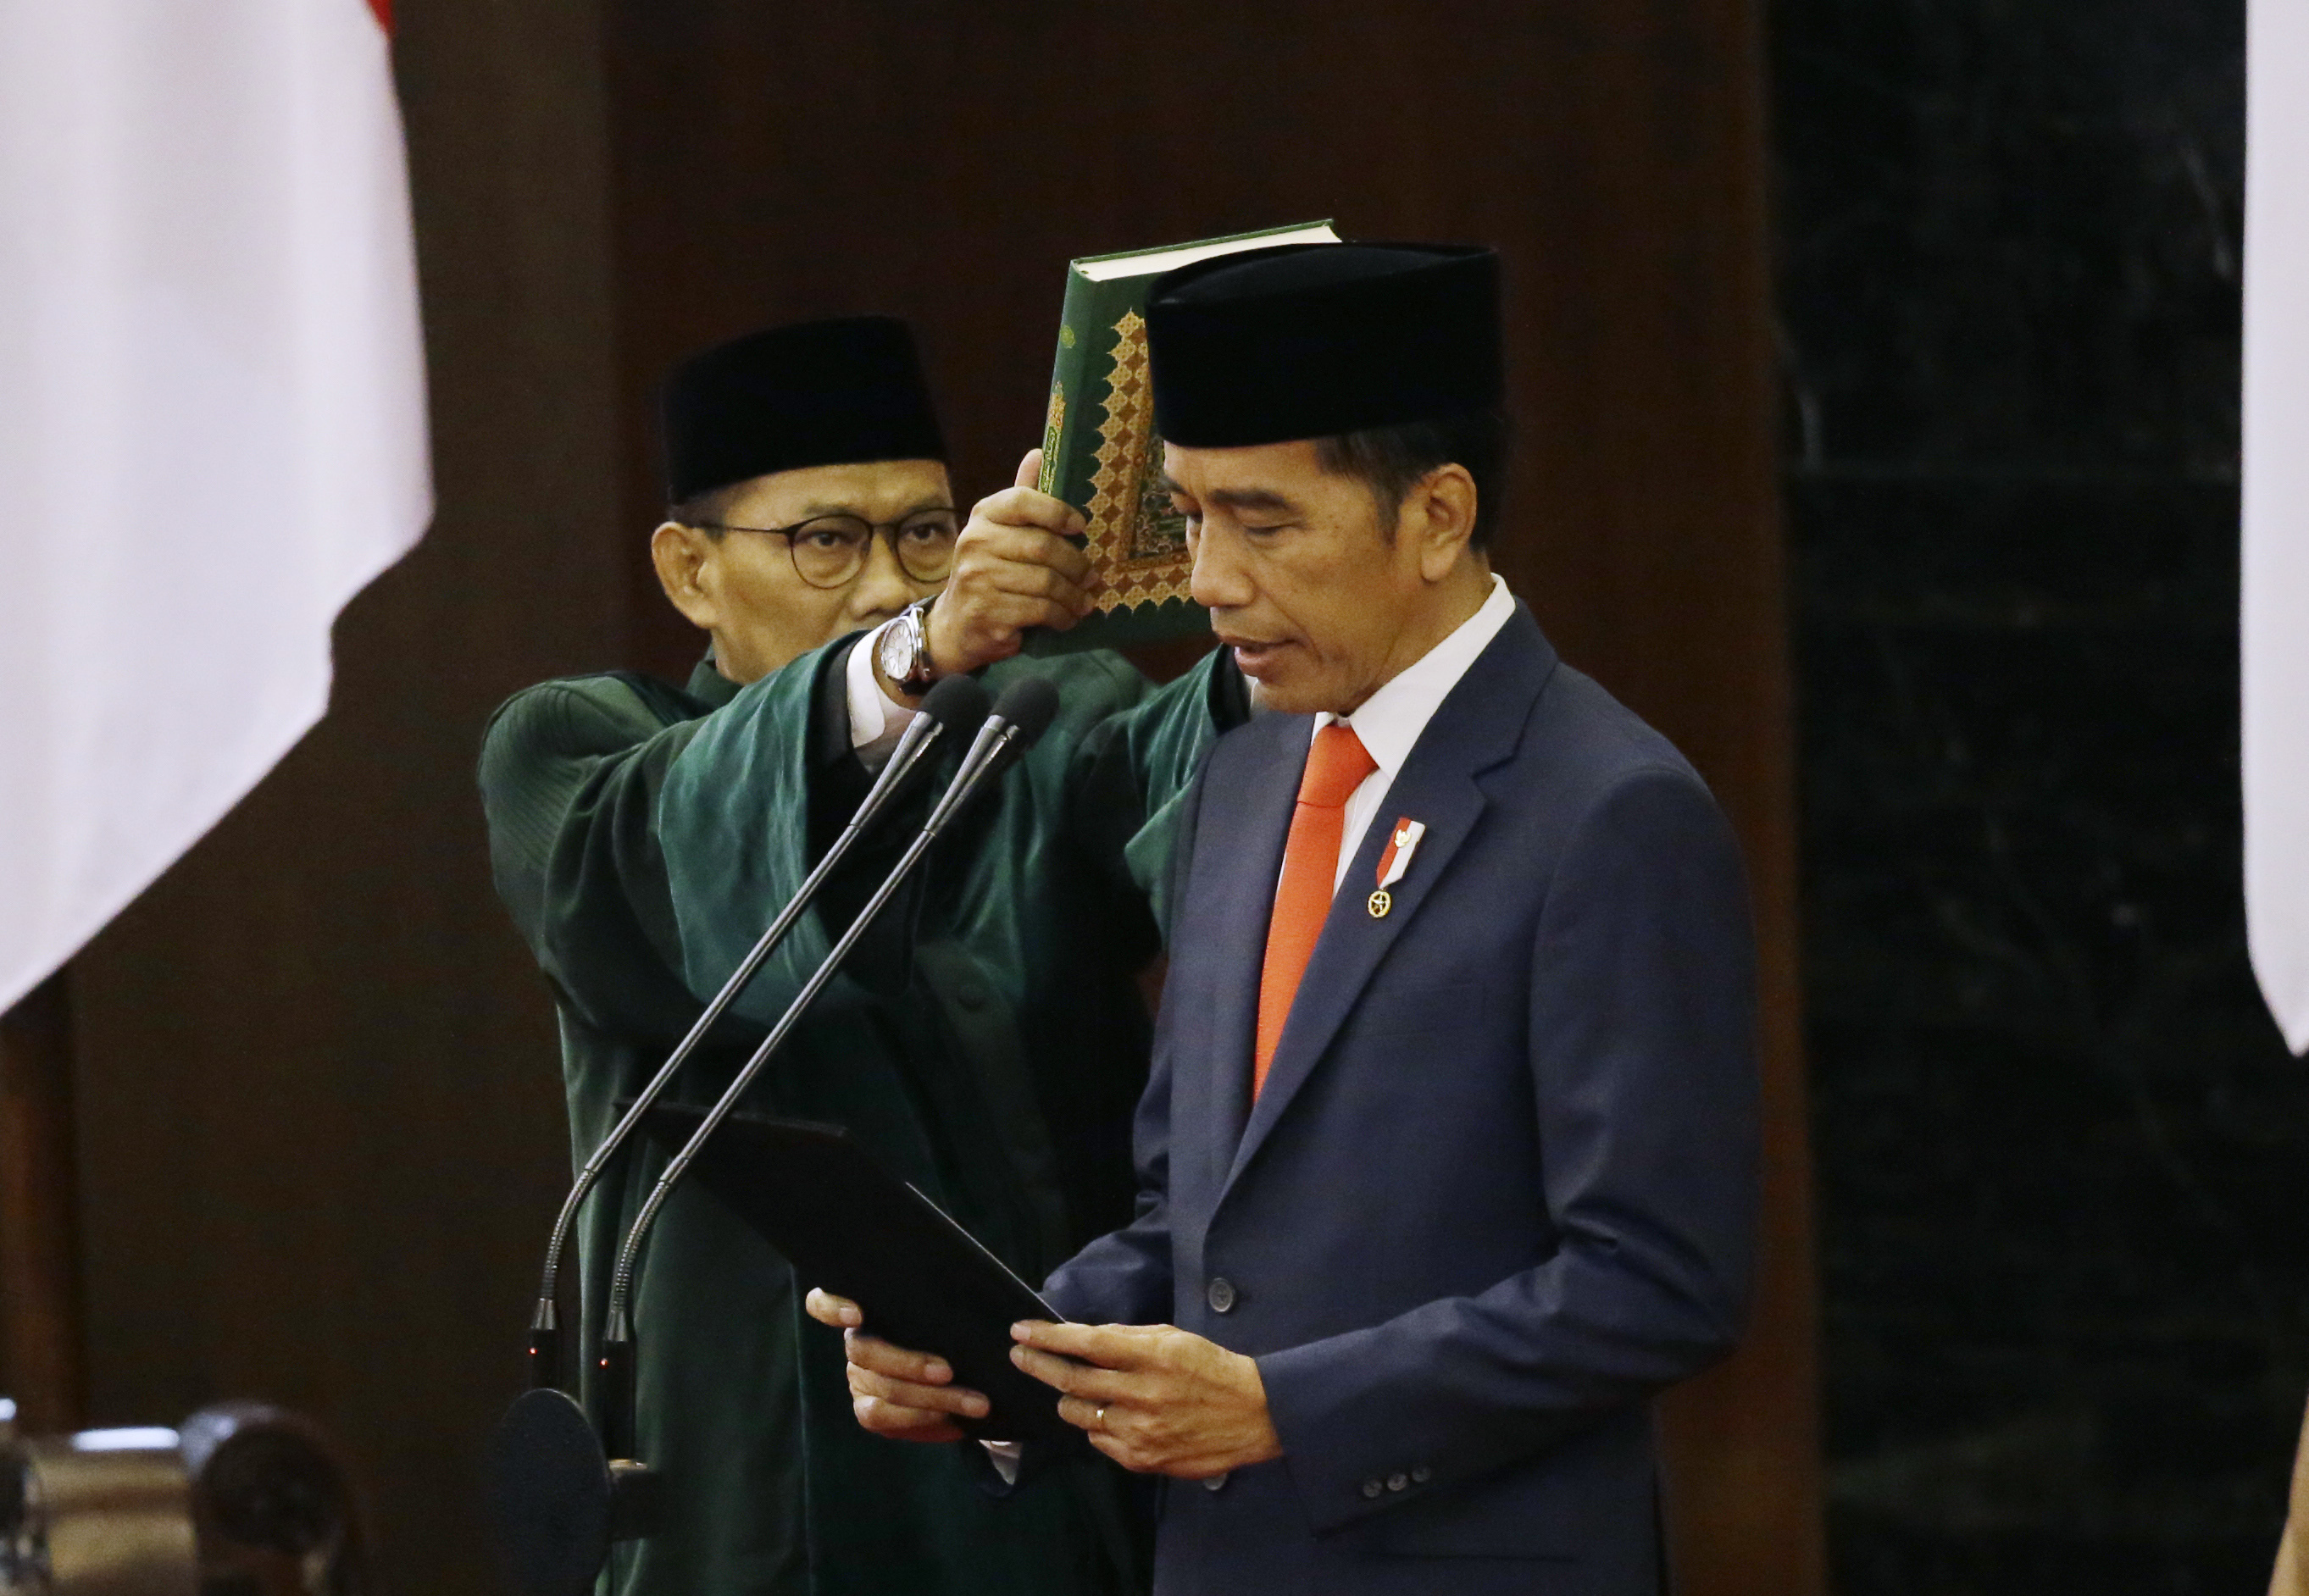 Indonesian President Joko Widodo, right, reads his oath during his inauguration ceremony as the country's seventh president at the parliament building in Jakarta, Indonesia Sunday, Oct. 20, 2019. Widodo, who rose from poverty and pledged to champion democracy, fight entrenched corruption and modernize the world's most populous Muslim-majority nation, was sworn in Sunday for his second and final five-year term with a pledge to take bolder actions. (AP Photo/Achmad Ibrahim, Pool)